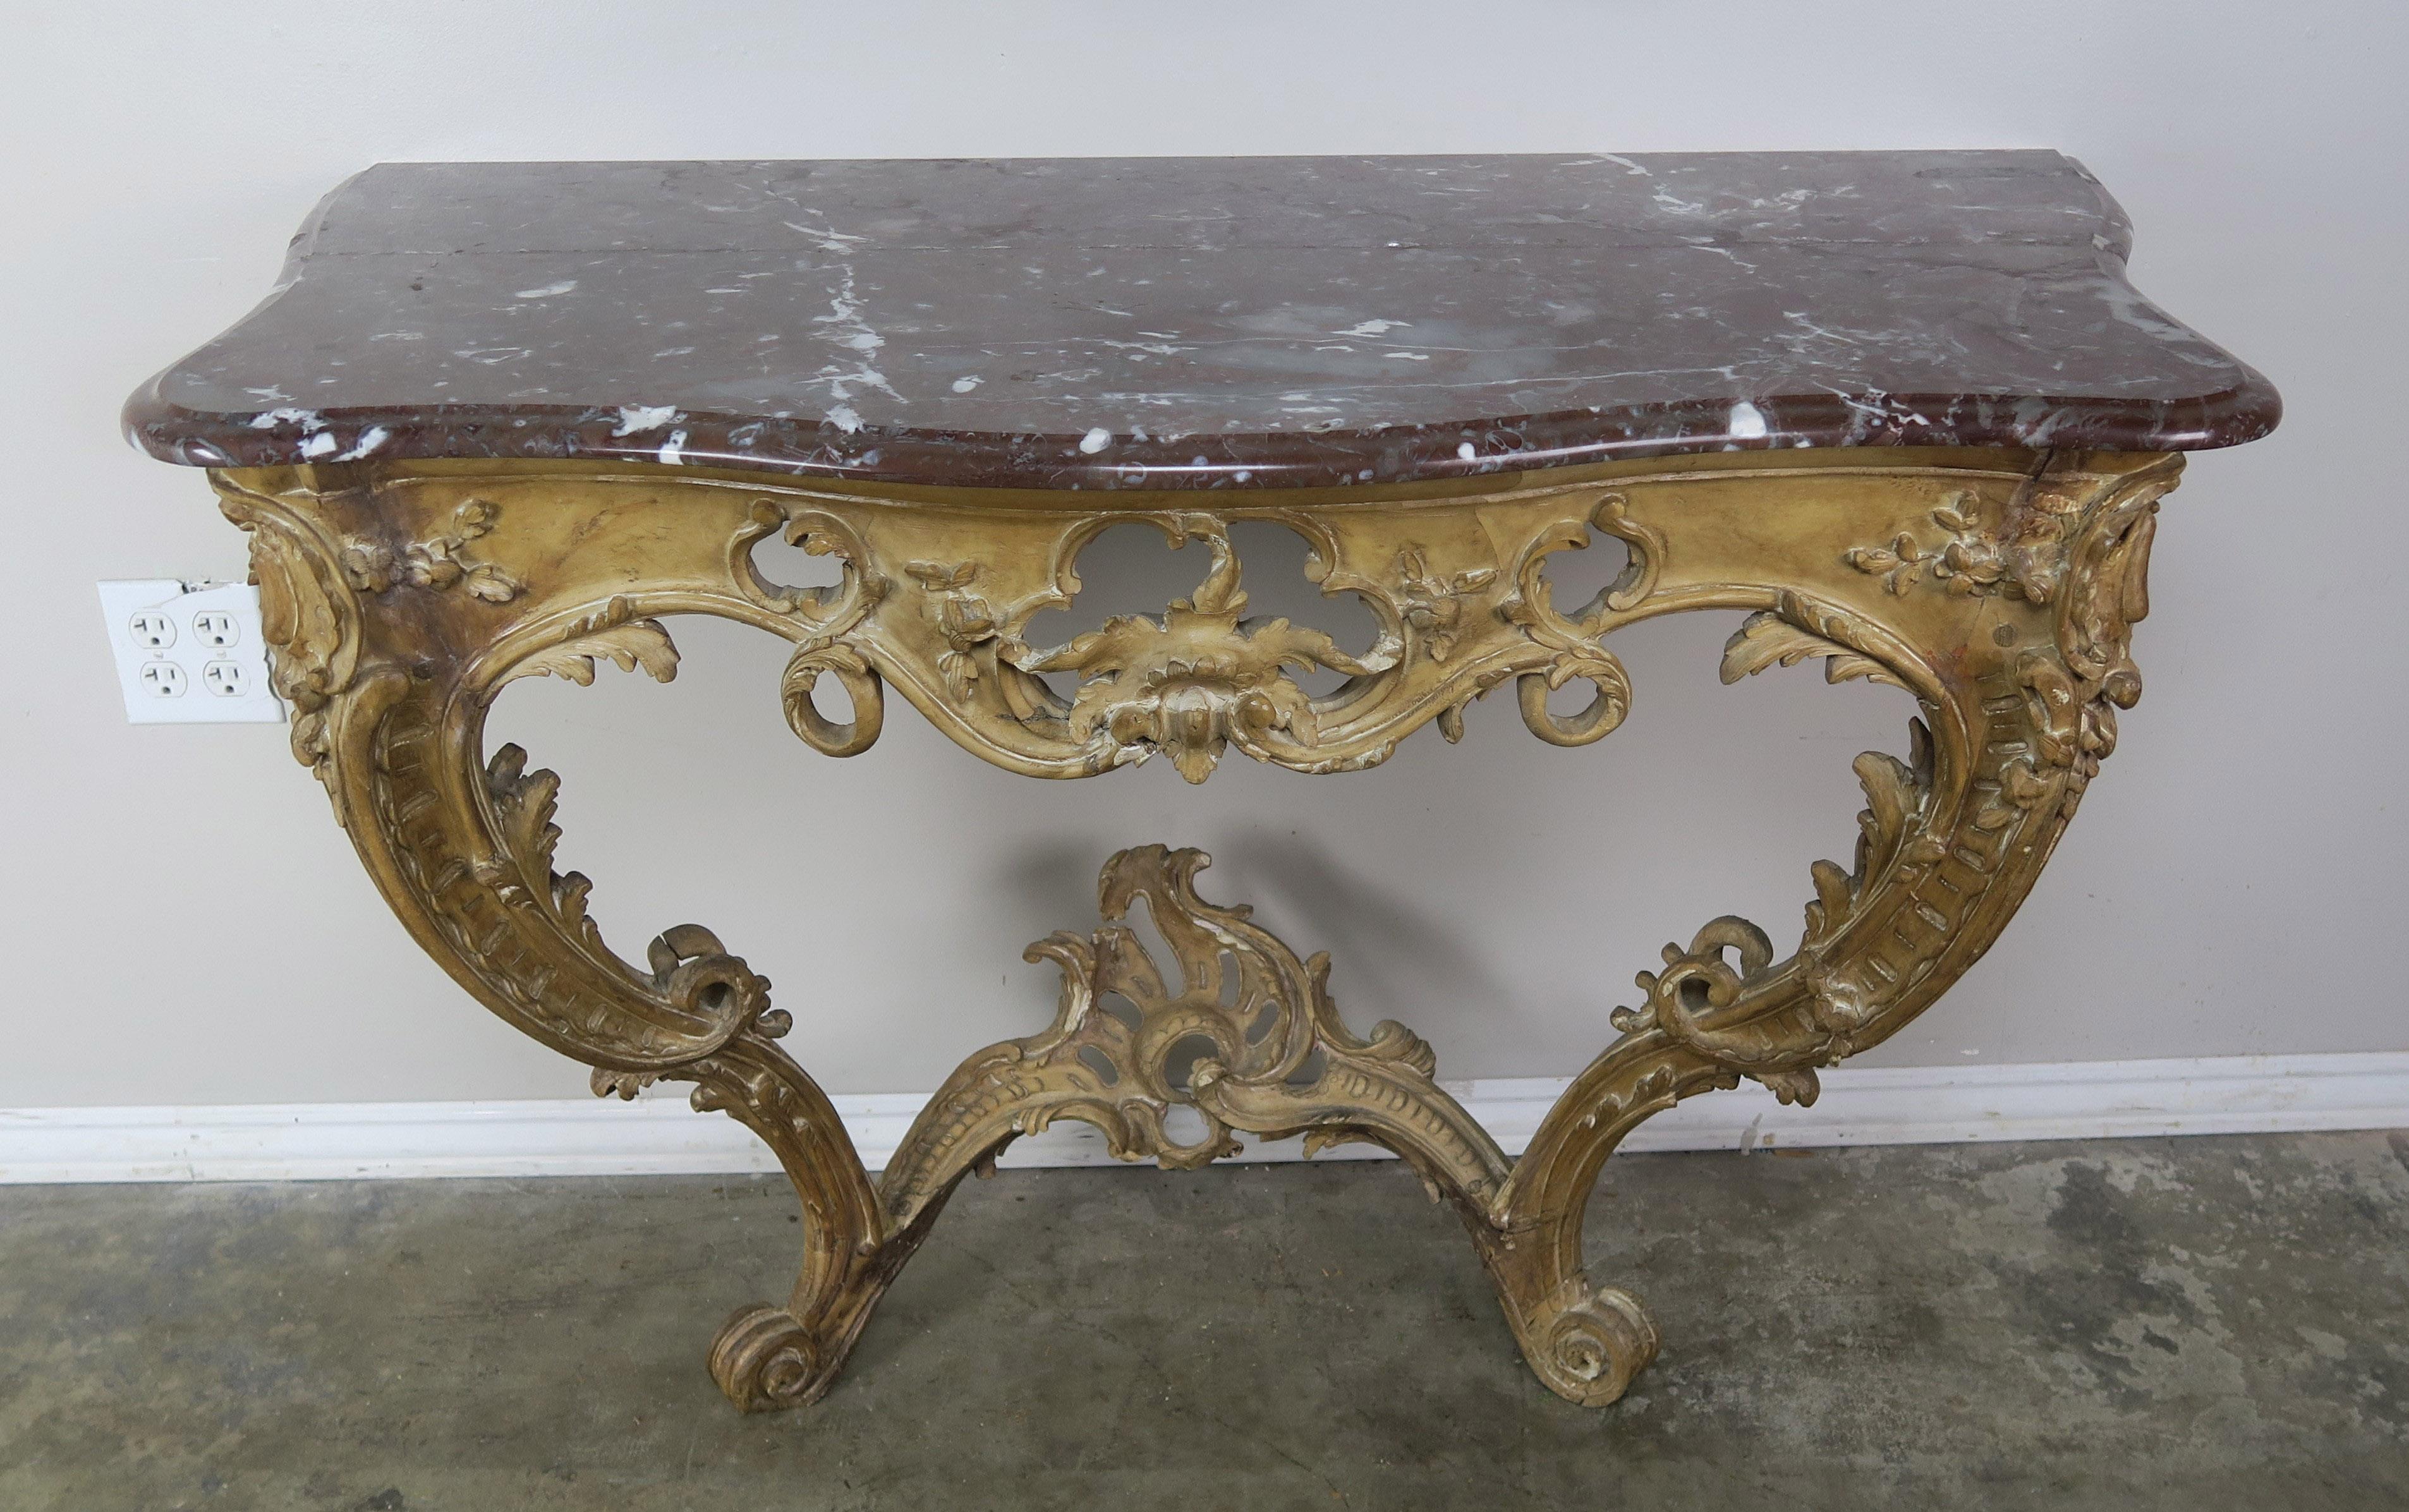 19th century French carved wood console with marble top. The console stands on two ornately carved cabriole legs that end in rams head feet. Carved acanthus leaves throughout. The tops is a beautiful brown & white marble with a single ogee &